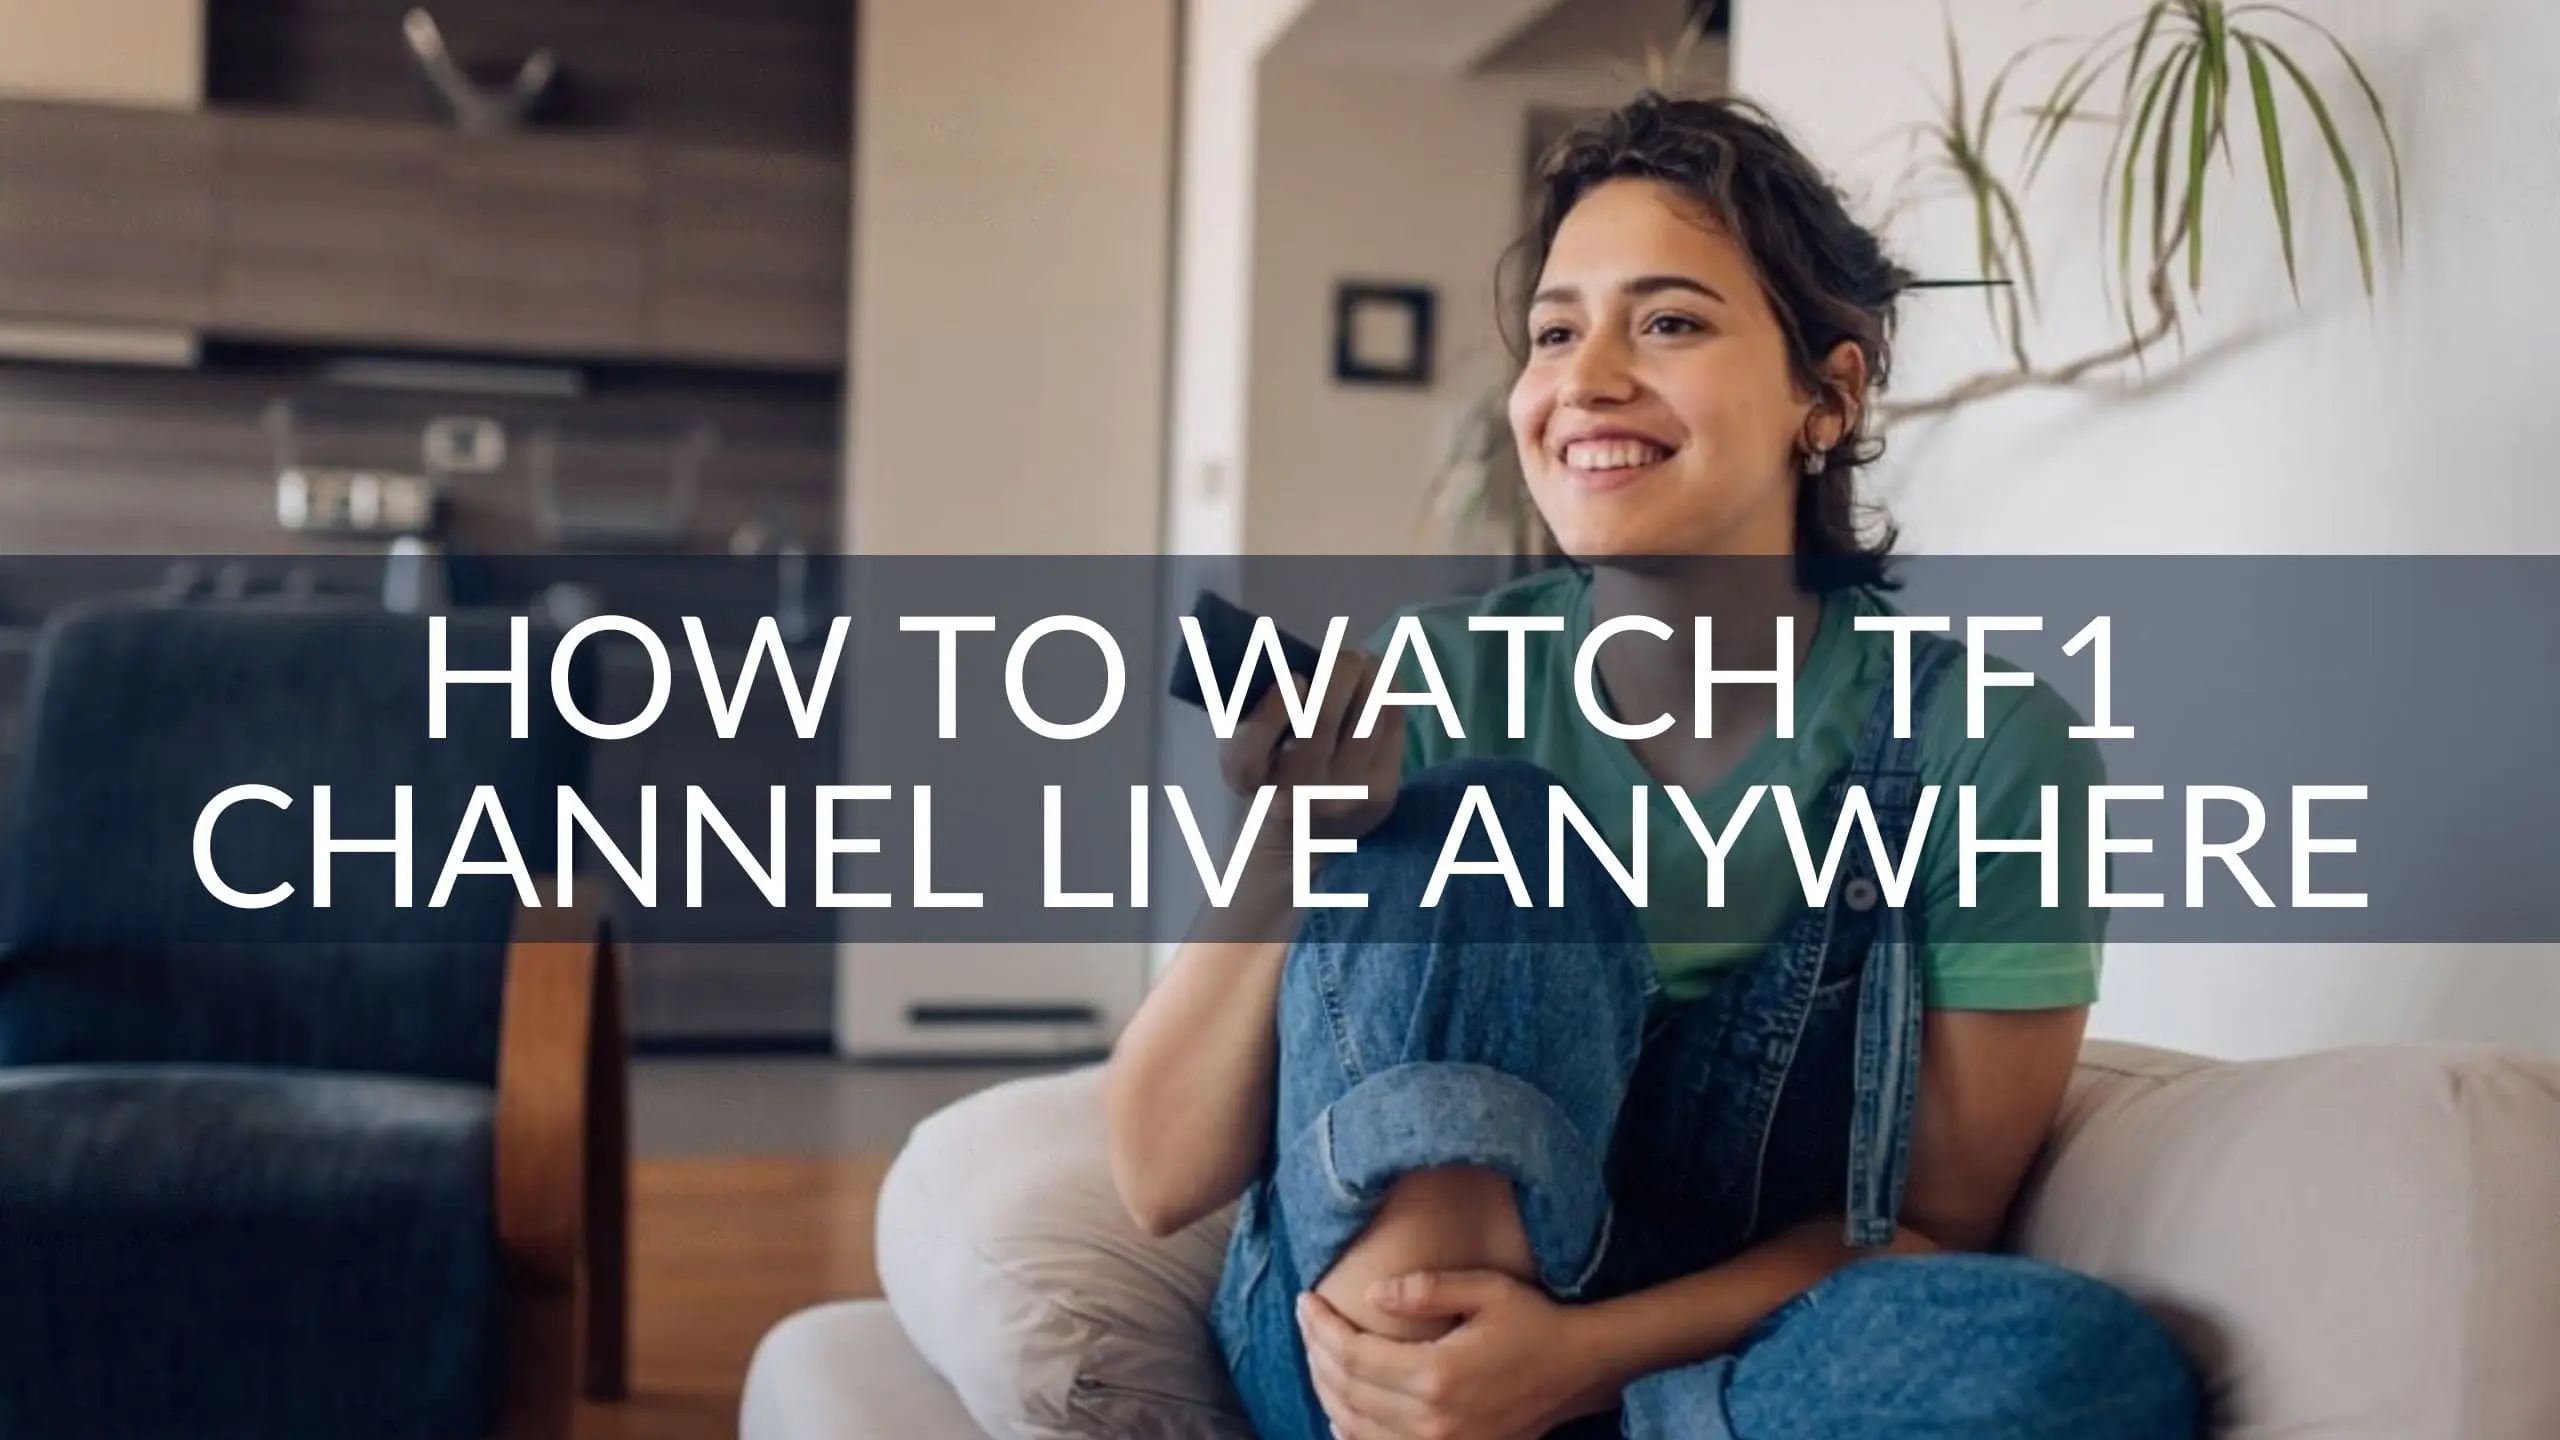 How to Watch TF1 Channel Live with IPTV Anywhere